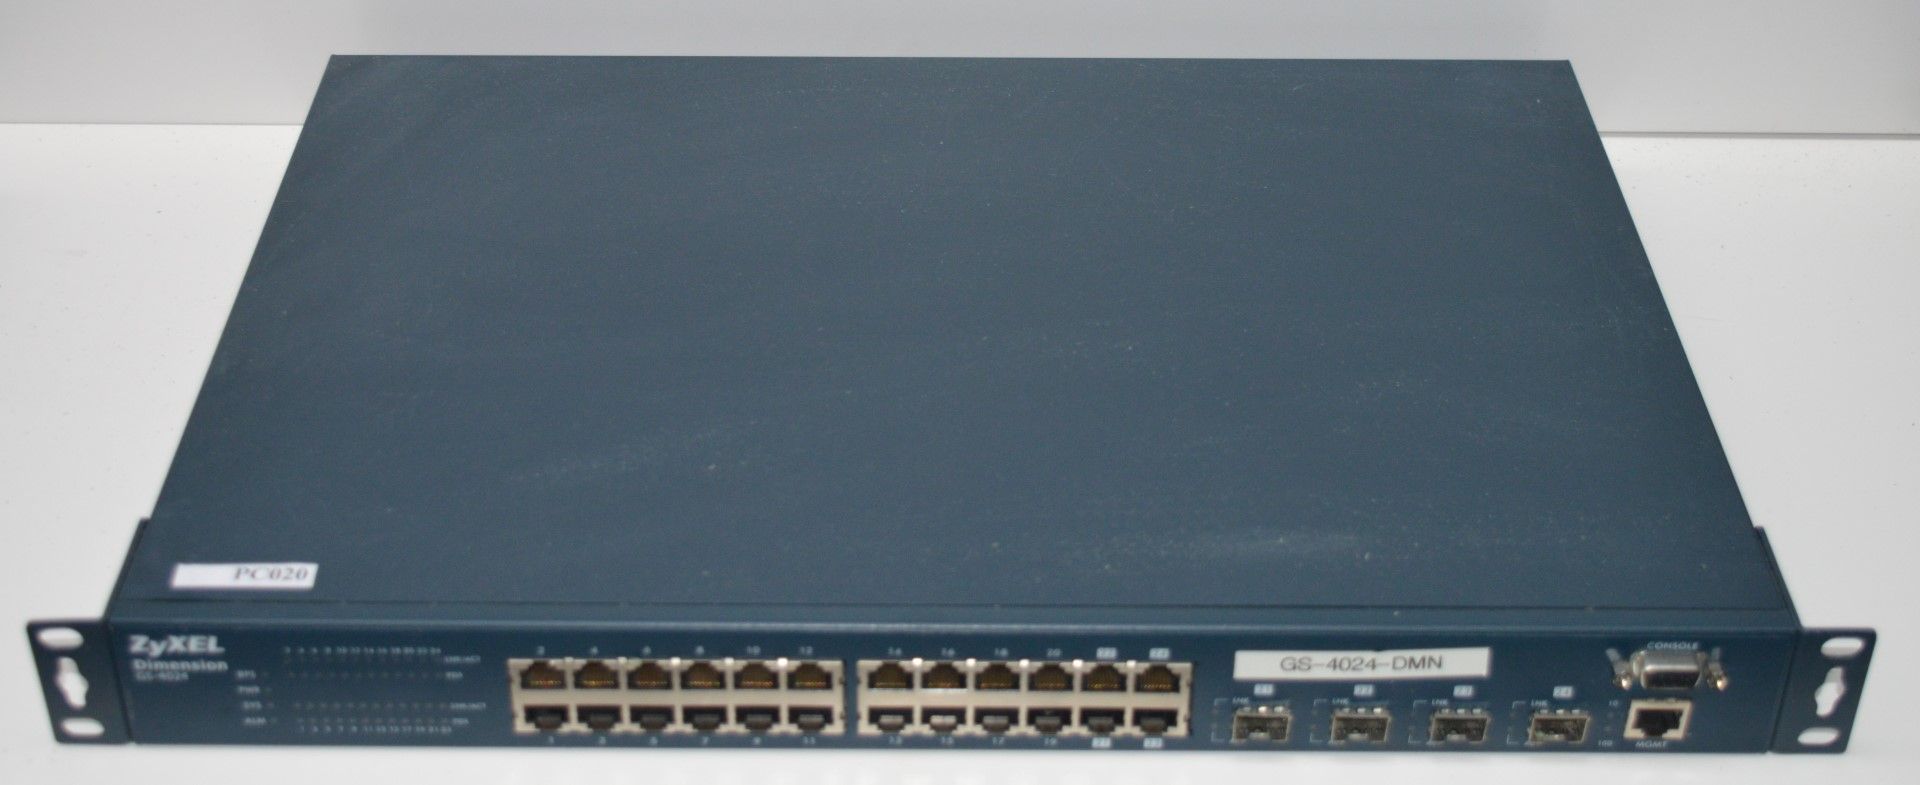 1 x Zyxel 24 Port Layer 2 Managed Gigibit Switch With Fiber Ports - Model GS-2024 - CL159 - Ref